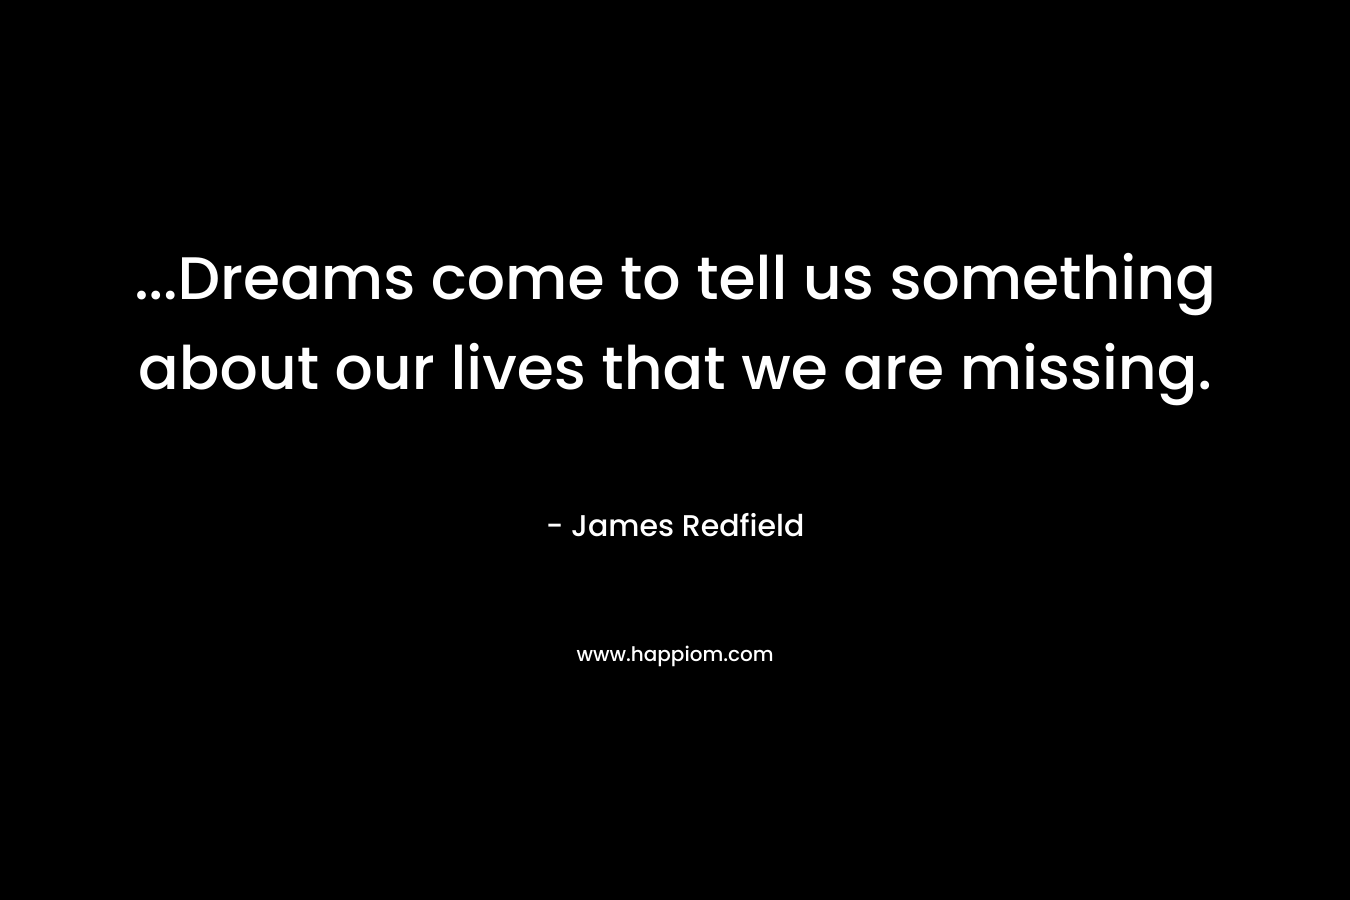 ...Dreams come to tell us something about our lives that we are missing.